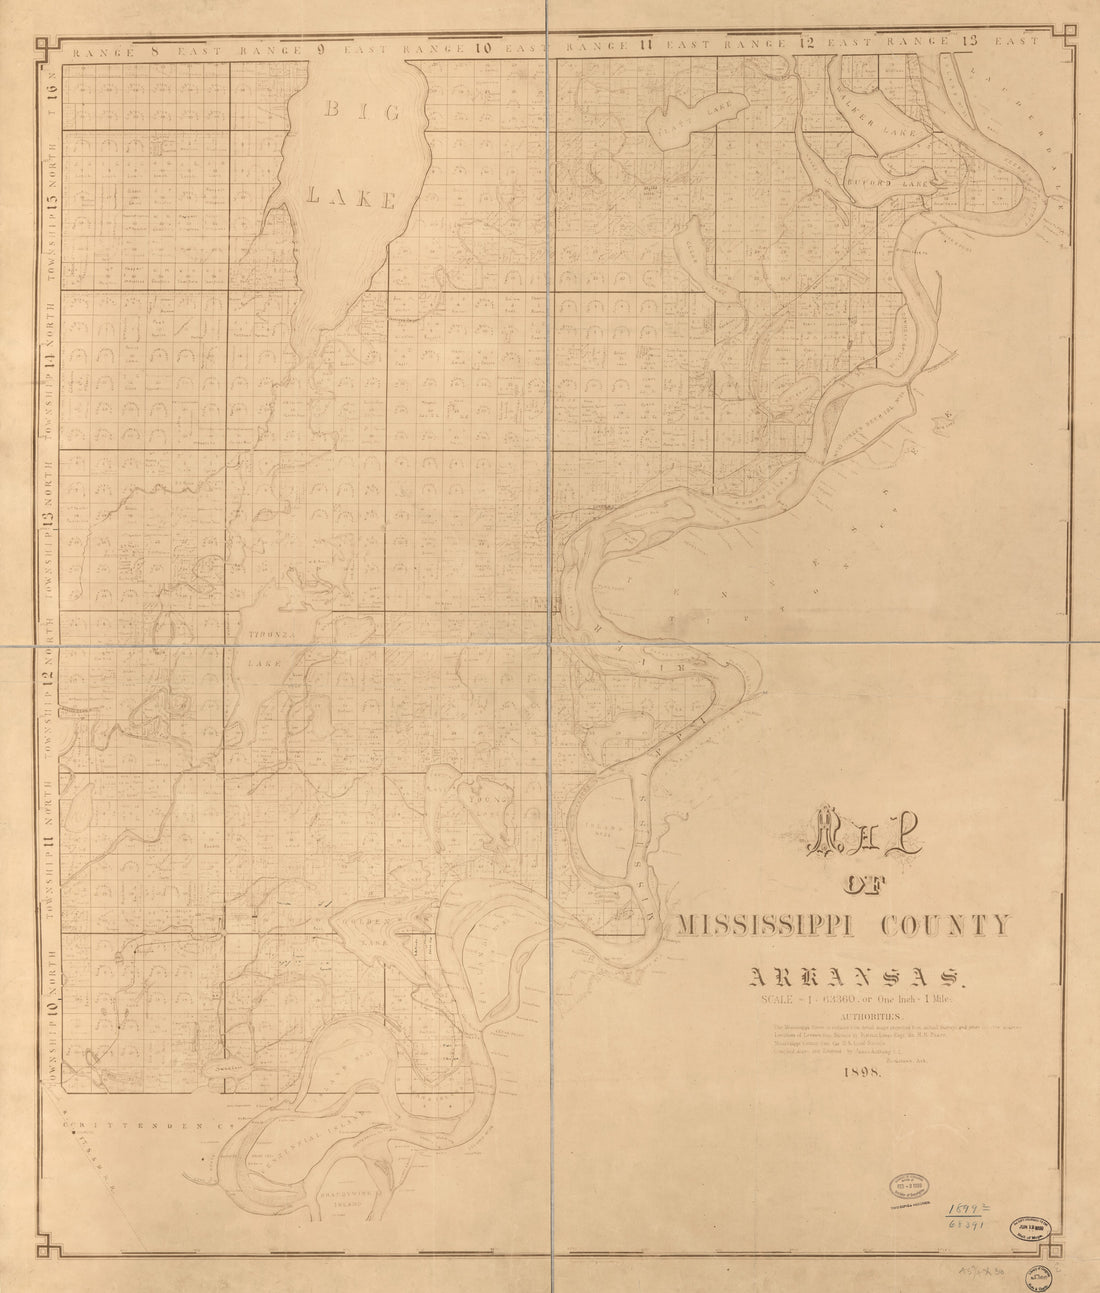 This old map of Map of Mississippi County, Arkansas from 1898 was created by James Anthony in 1898